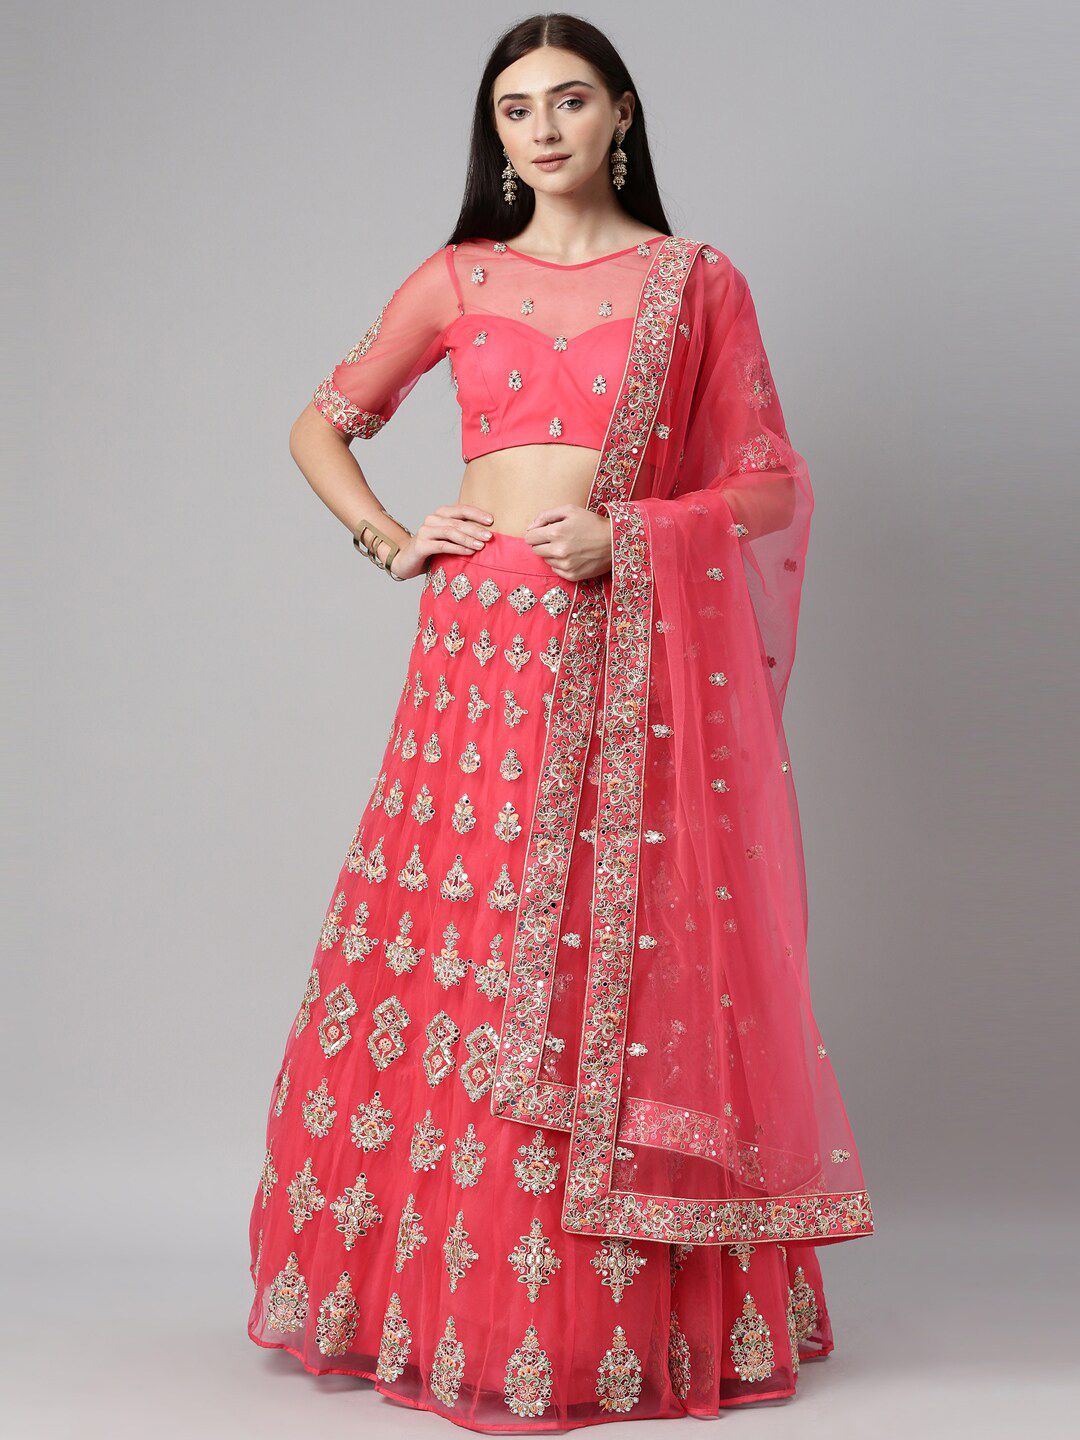 panchhi Pink & Silver-Toned Embroidered Mirror Work Semi-Stitched Lehenga & Unstitched Blouse With Dupatta Price in India